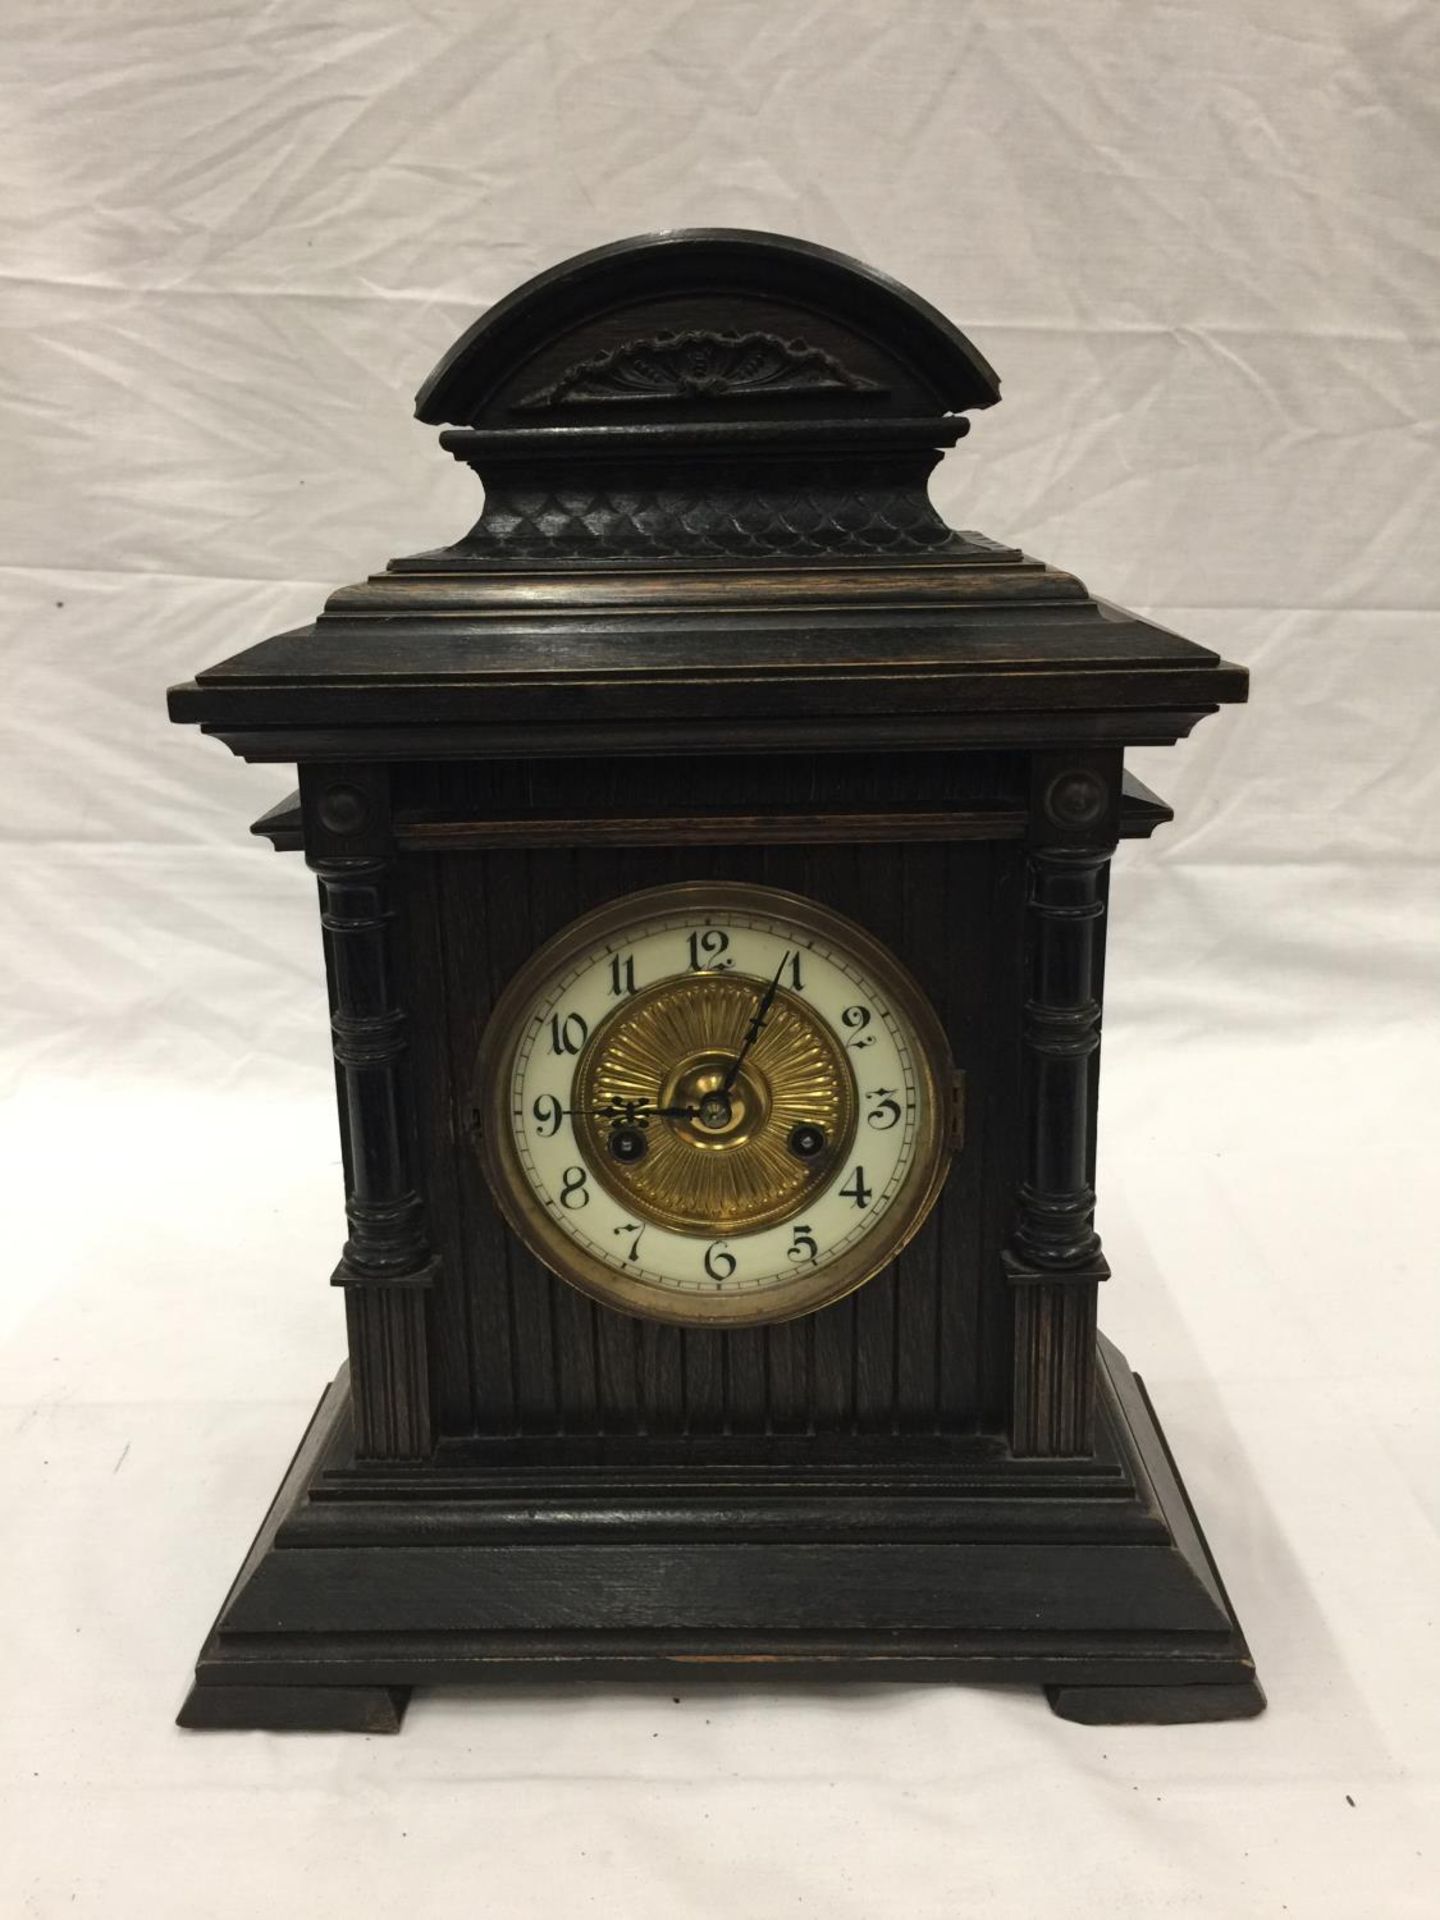 AN ORNATE CHIMING MANTLE CLOCK WITH GERMAN MOVEMENT AND PENDULUM. KEY IS PRESENT AND WORKING AT TIME